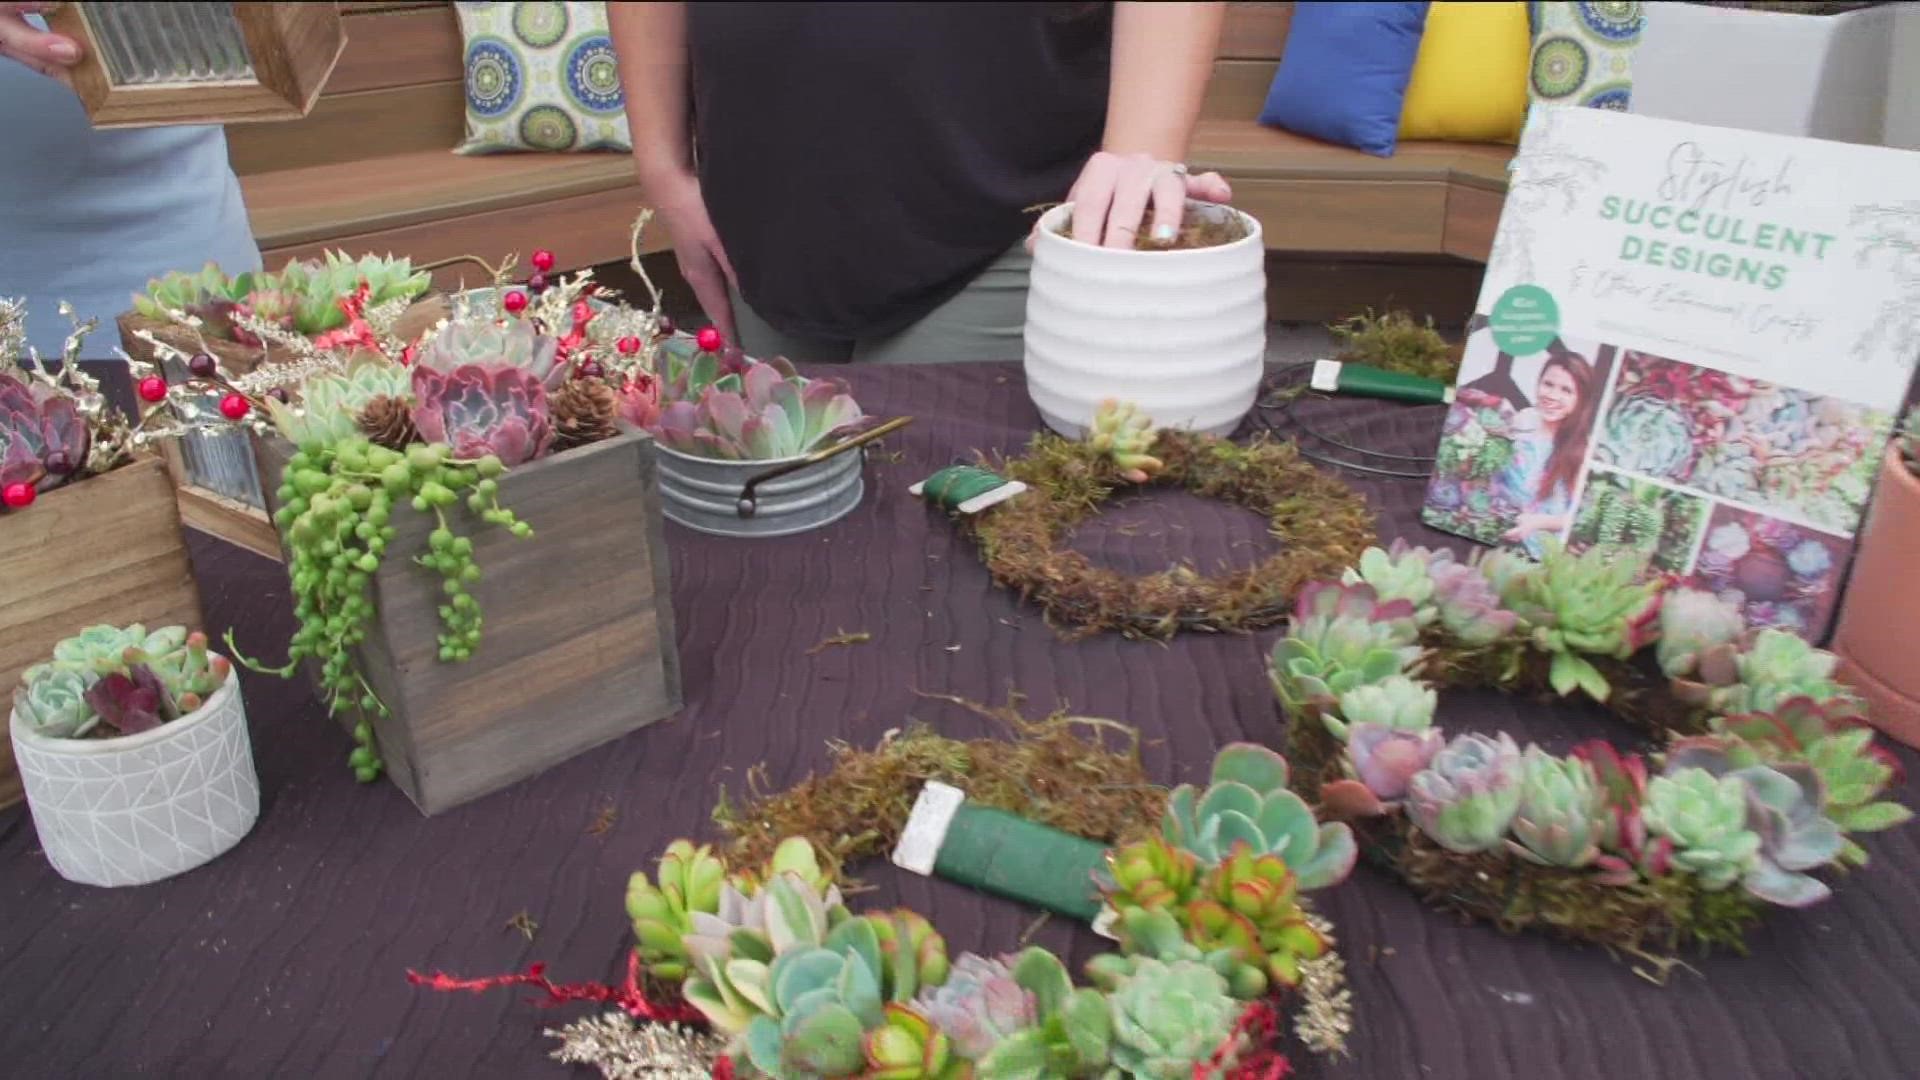 Jessica Cain from In Succulent Love demoed some unique gifts you can make at home for people.